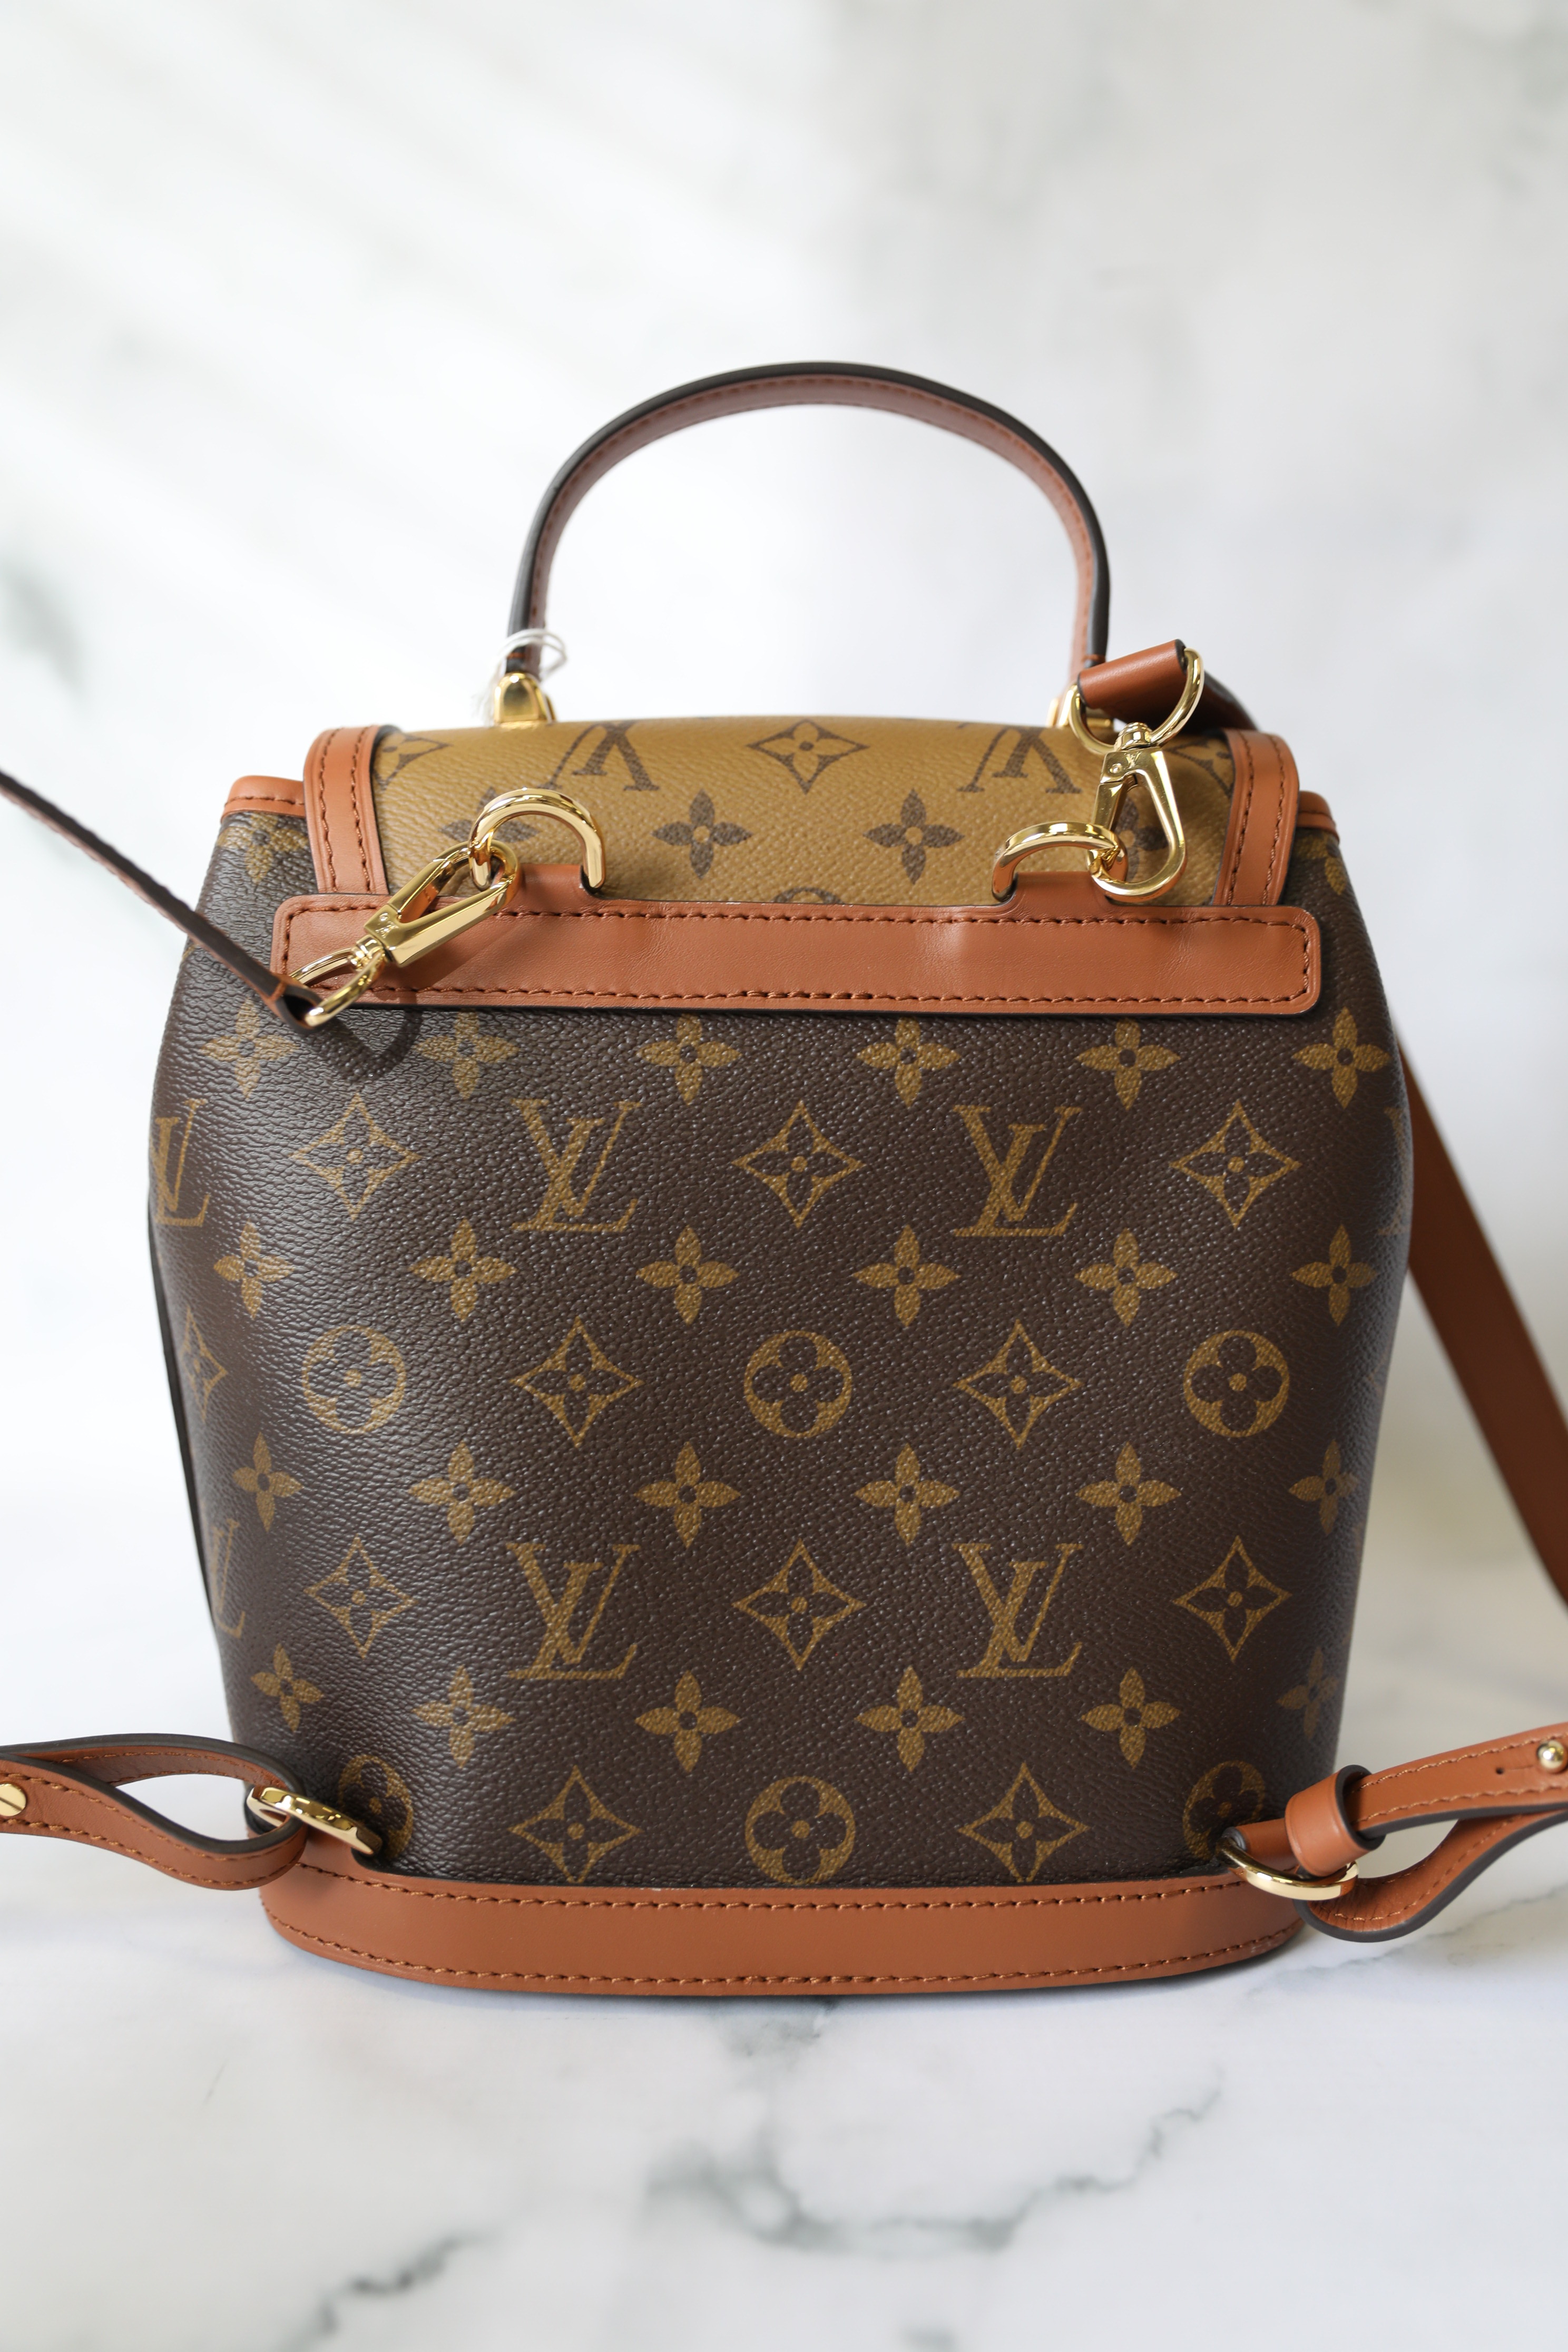 Shopybuybuybuy - Lv DAUPHINE PM BACKPACK Rm12600